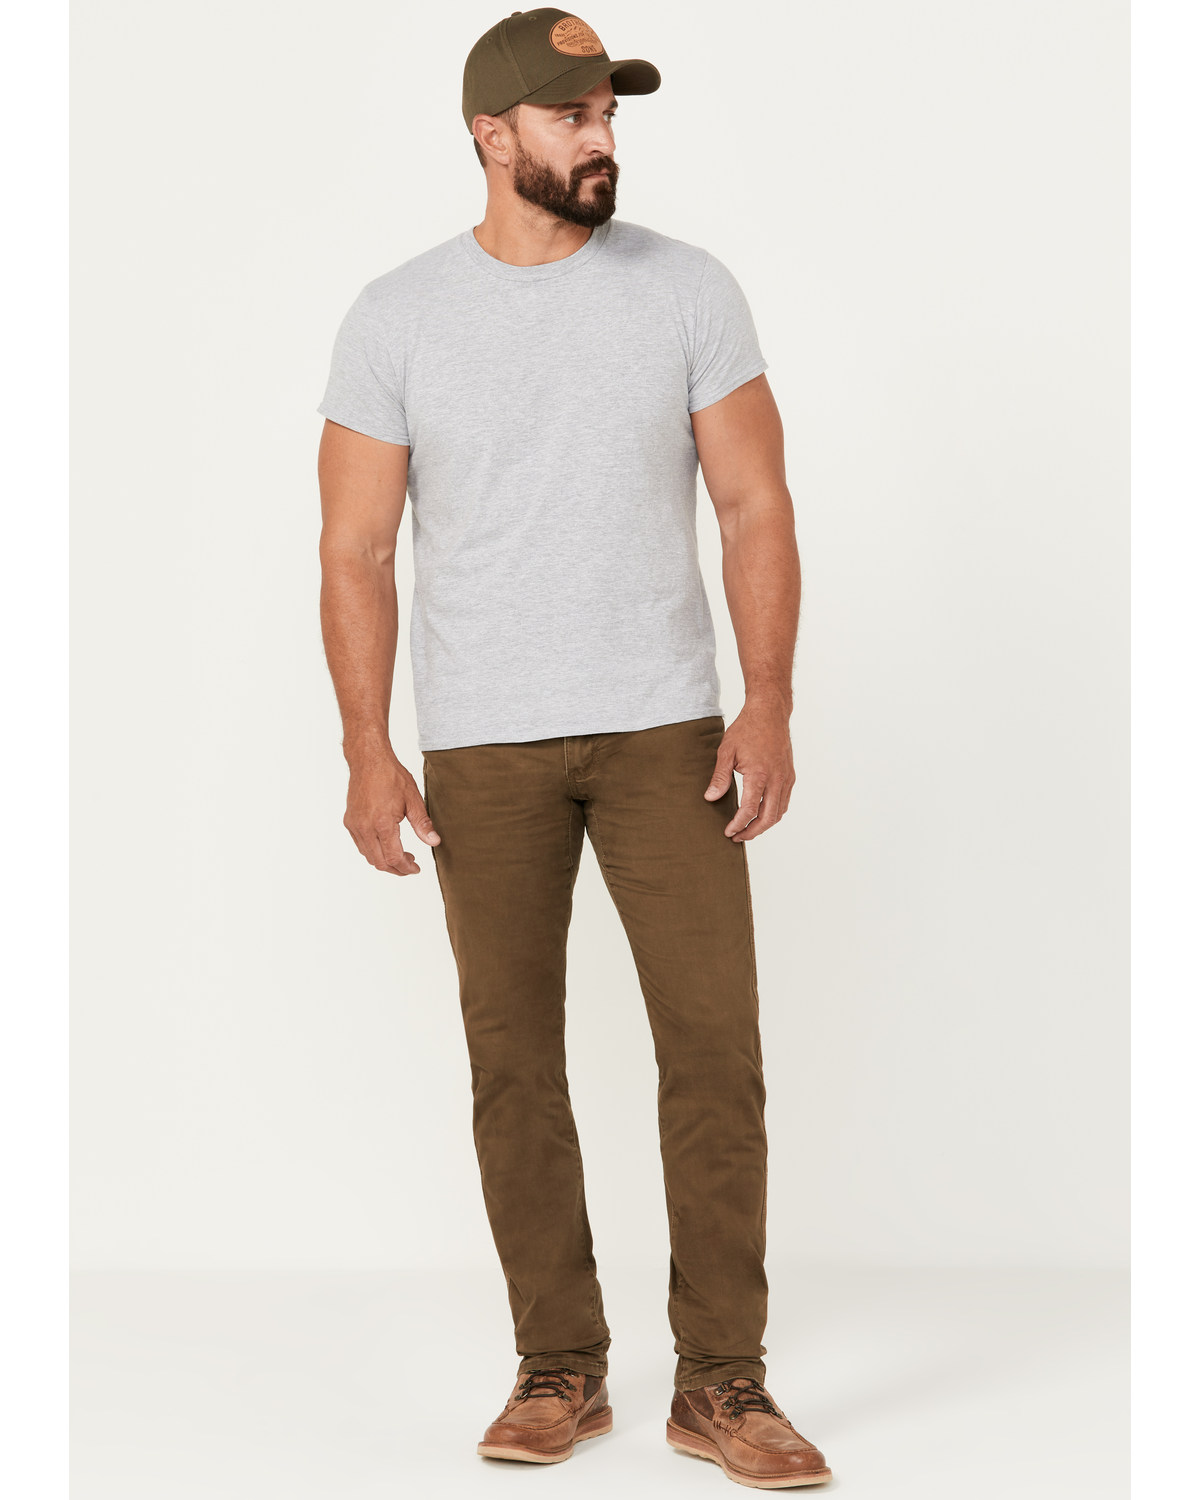 Brothers and Sons Men's Chino Pants